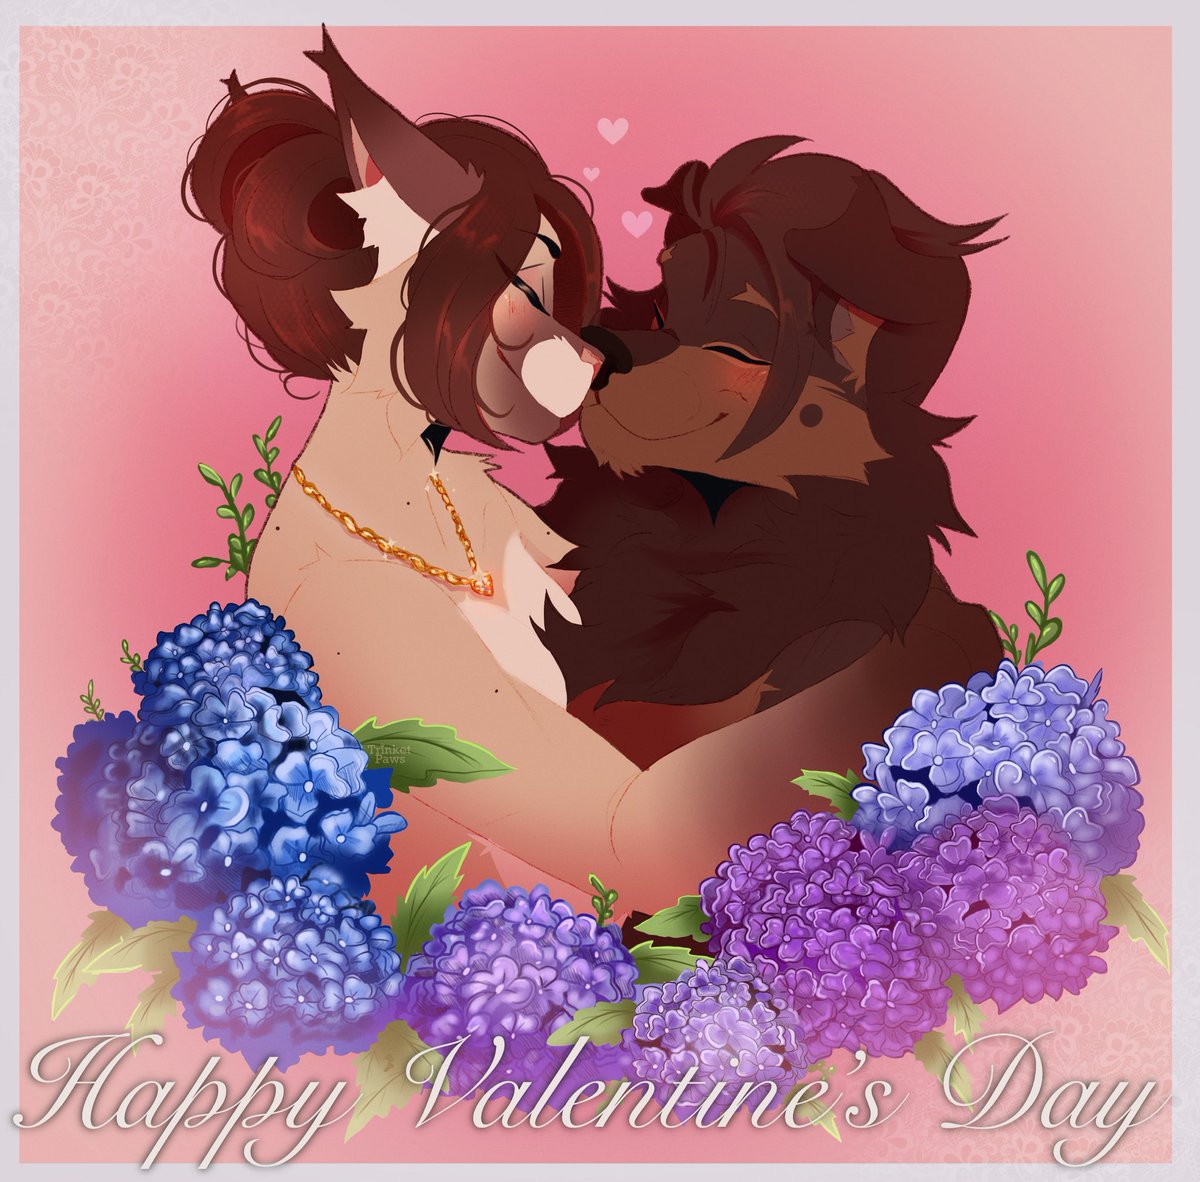 Happy Valentine’s Day! Here’s a piece I made for my boy. I hope everyone has a wonderful day wether it is spent with family, friends, or partners 💜

#longdistance #ValentinesDay